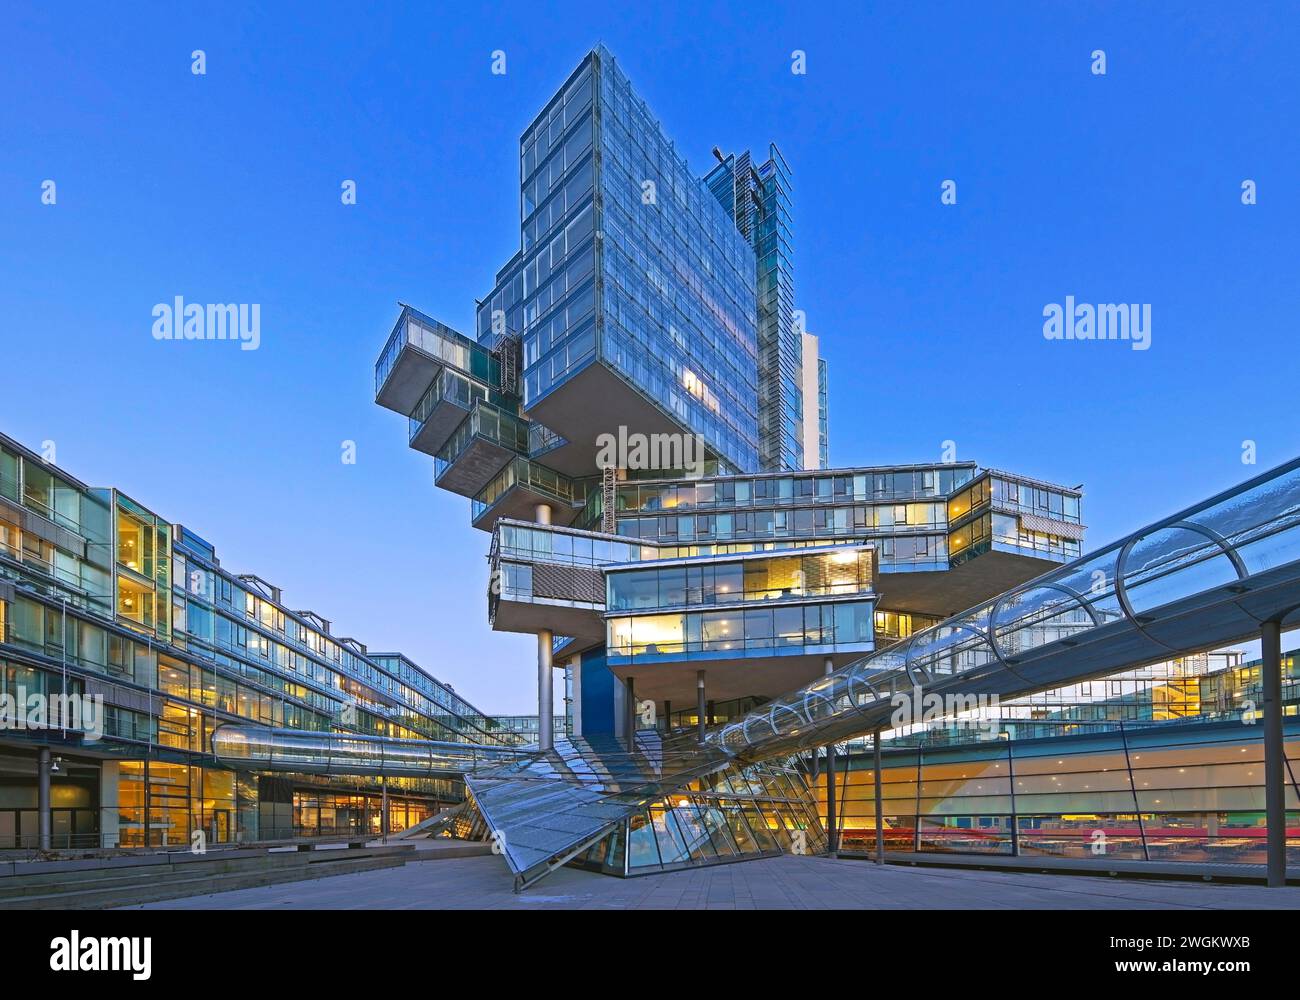 Administration building of Nord LB, Norddeutsche Landesbank, Germany, Lower Saxony, Hanover Stock Photo